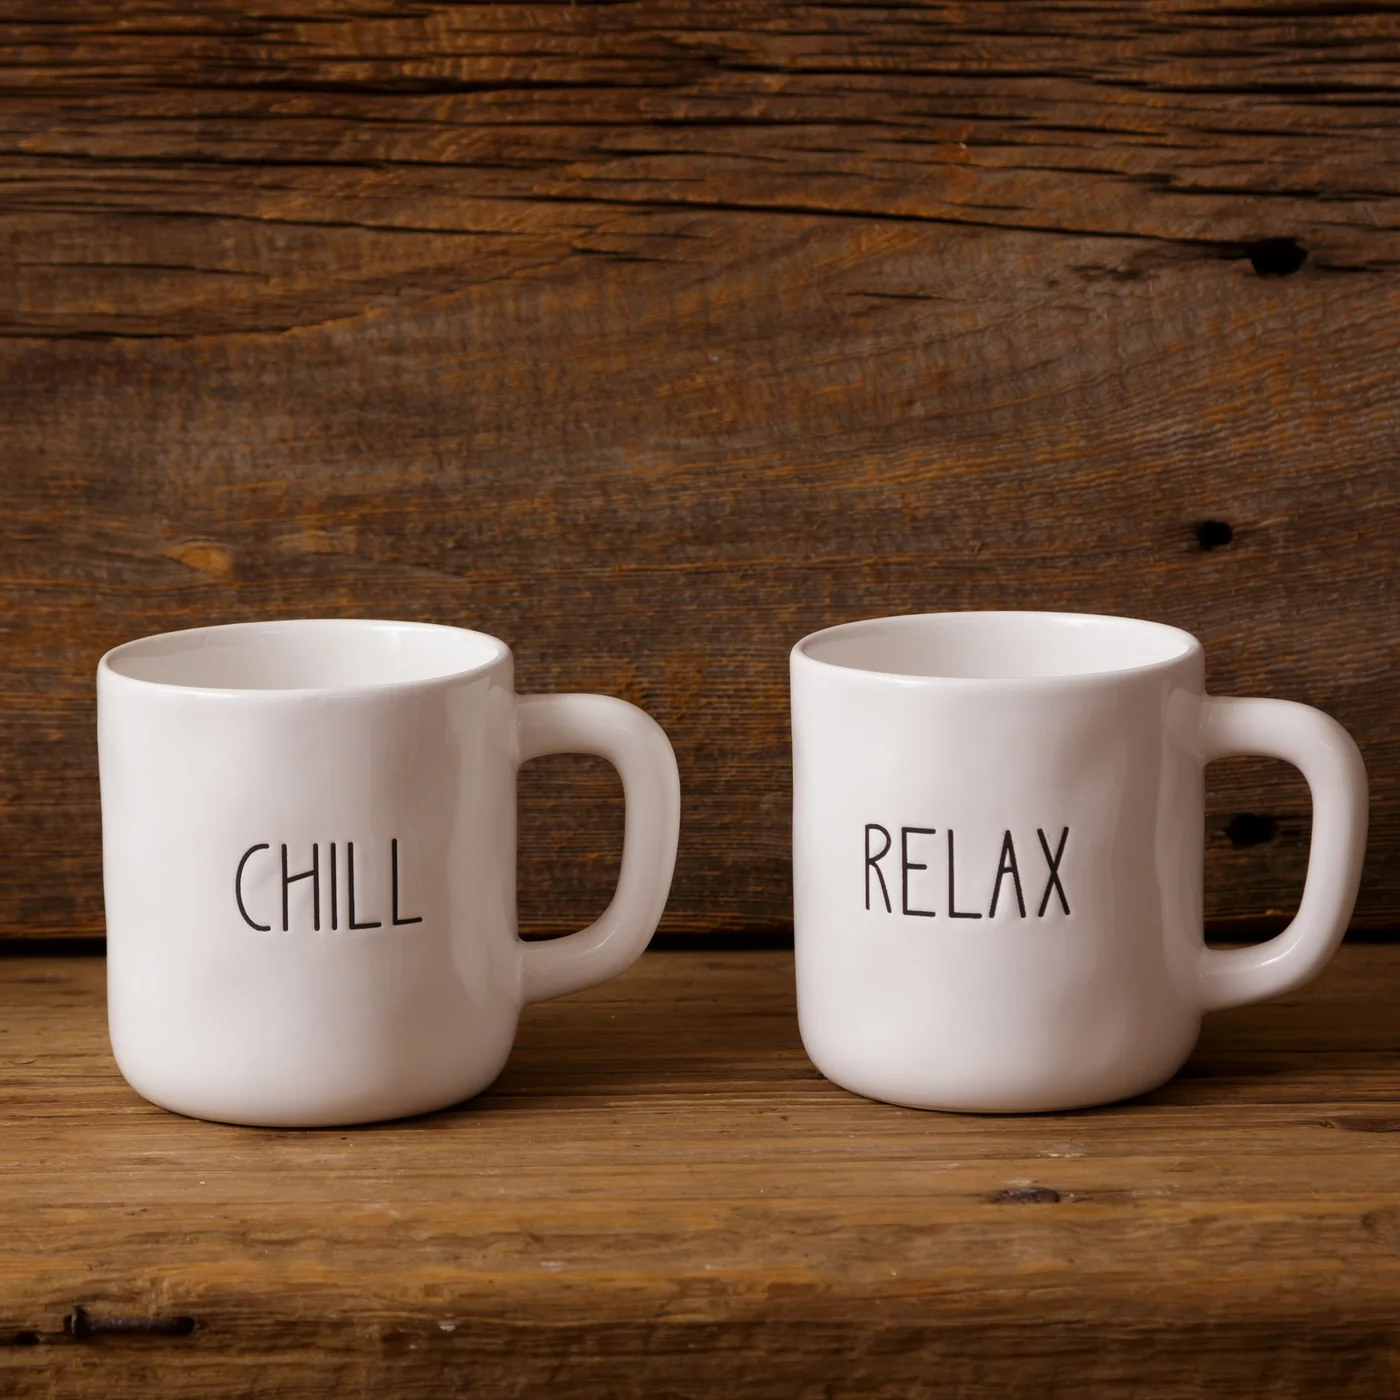 Set of 2 Relax and Chill Ceramic Mugs